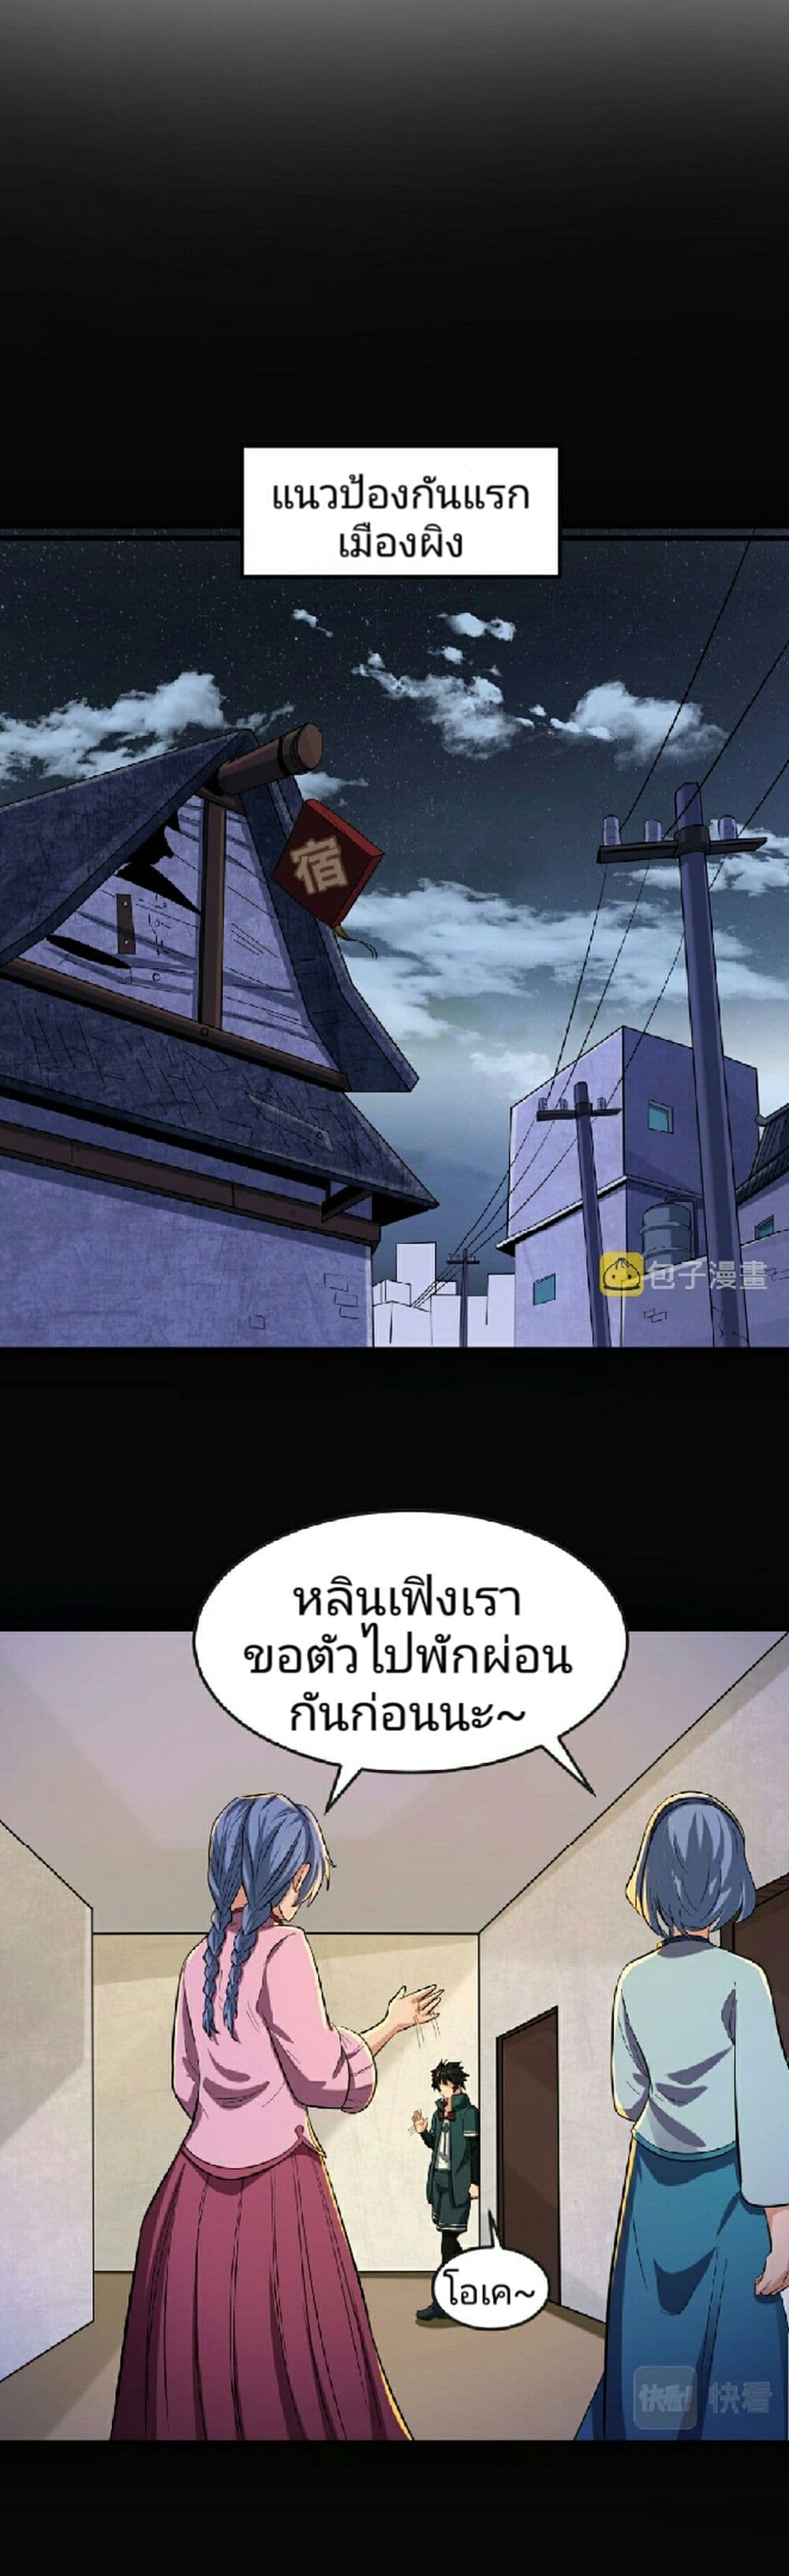 The Age of Ghost Spirits à¸à¸­à¸à¸à¸µà¹ 49 (8)